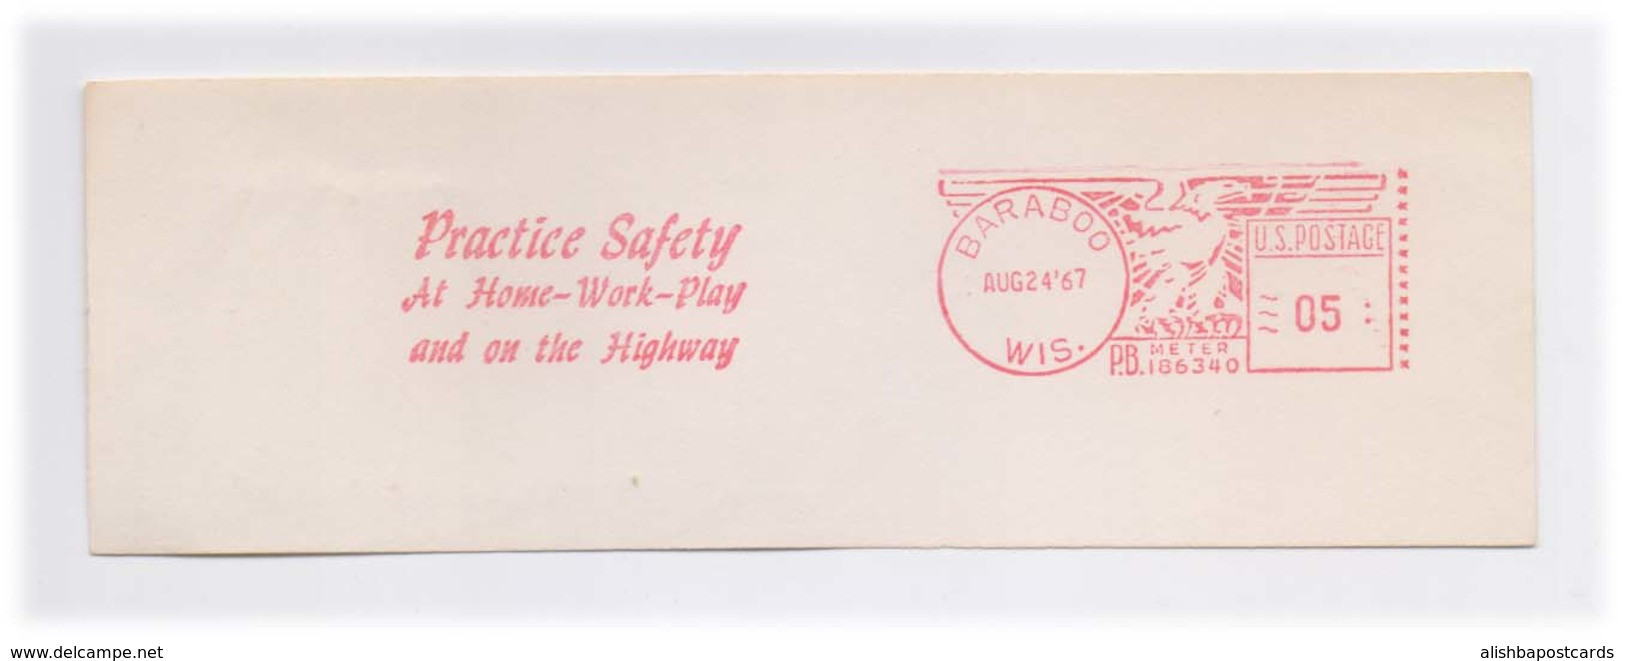 EMA Meter Frank Front Cover Cut Red Meter Mark Practice Safety At Home Work Play And On Highway Slogan US POSTAGE - Unfälle Und Verkehrssicherheit